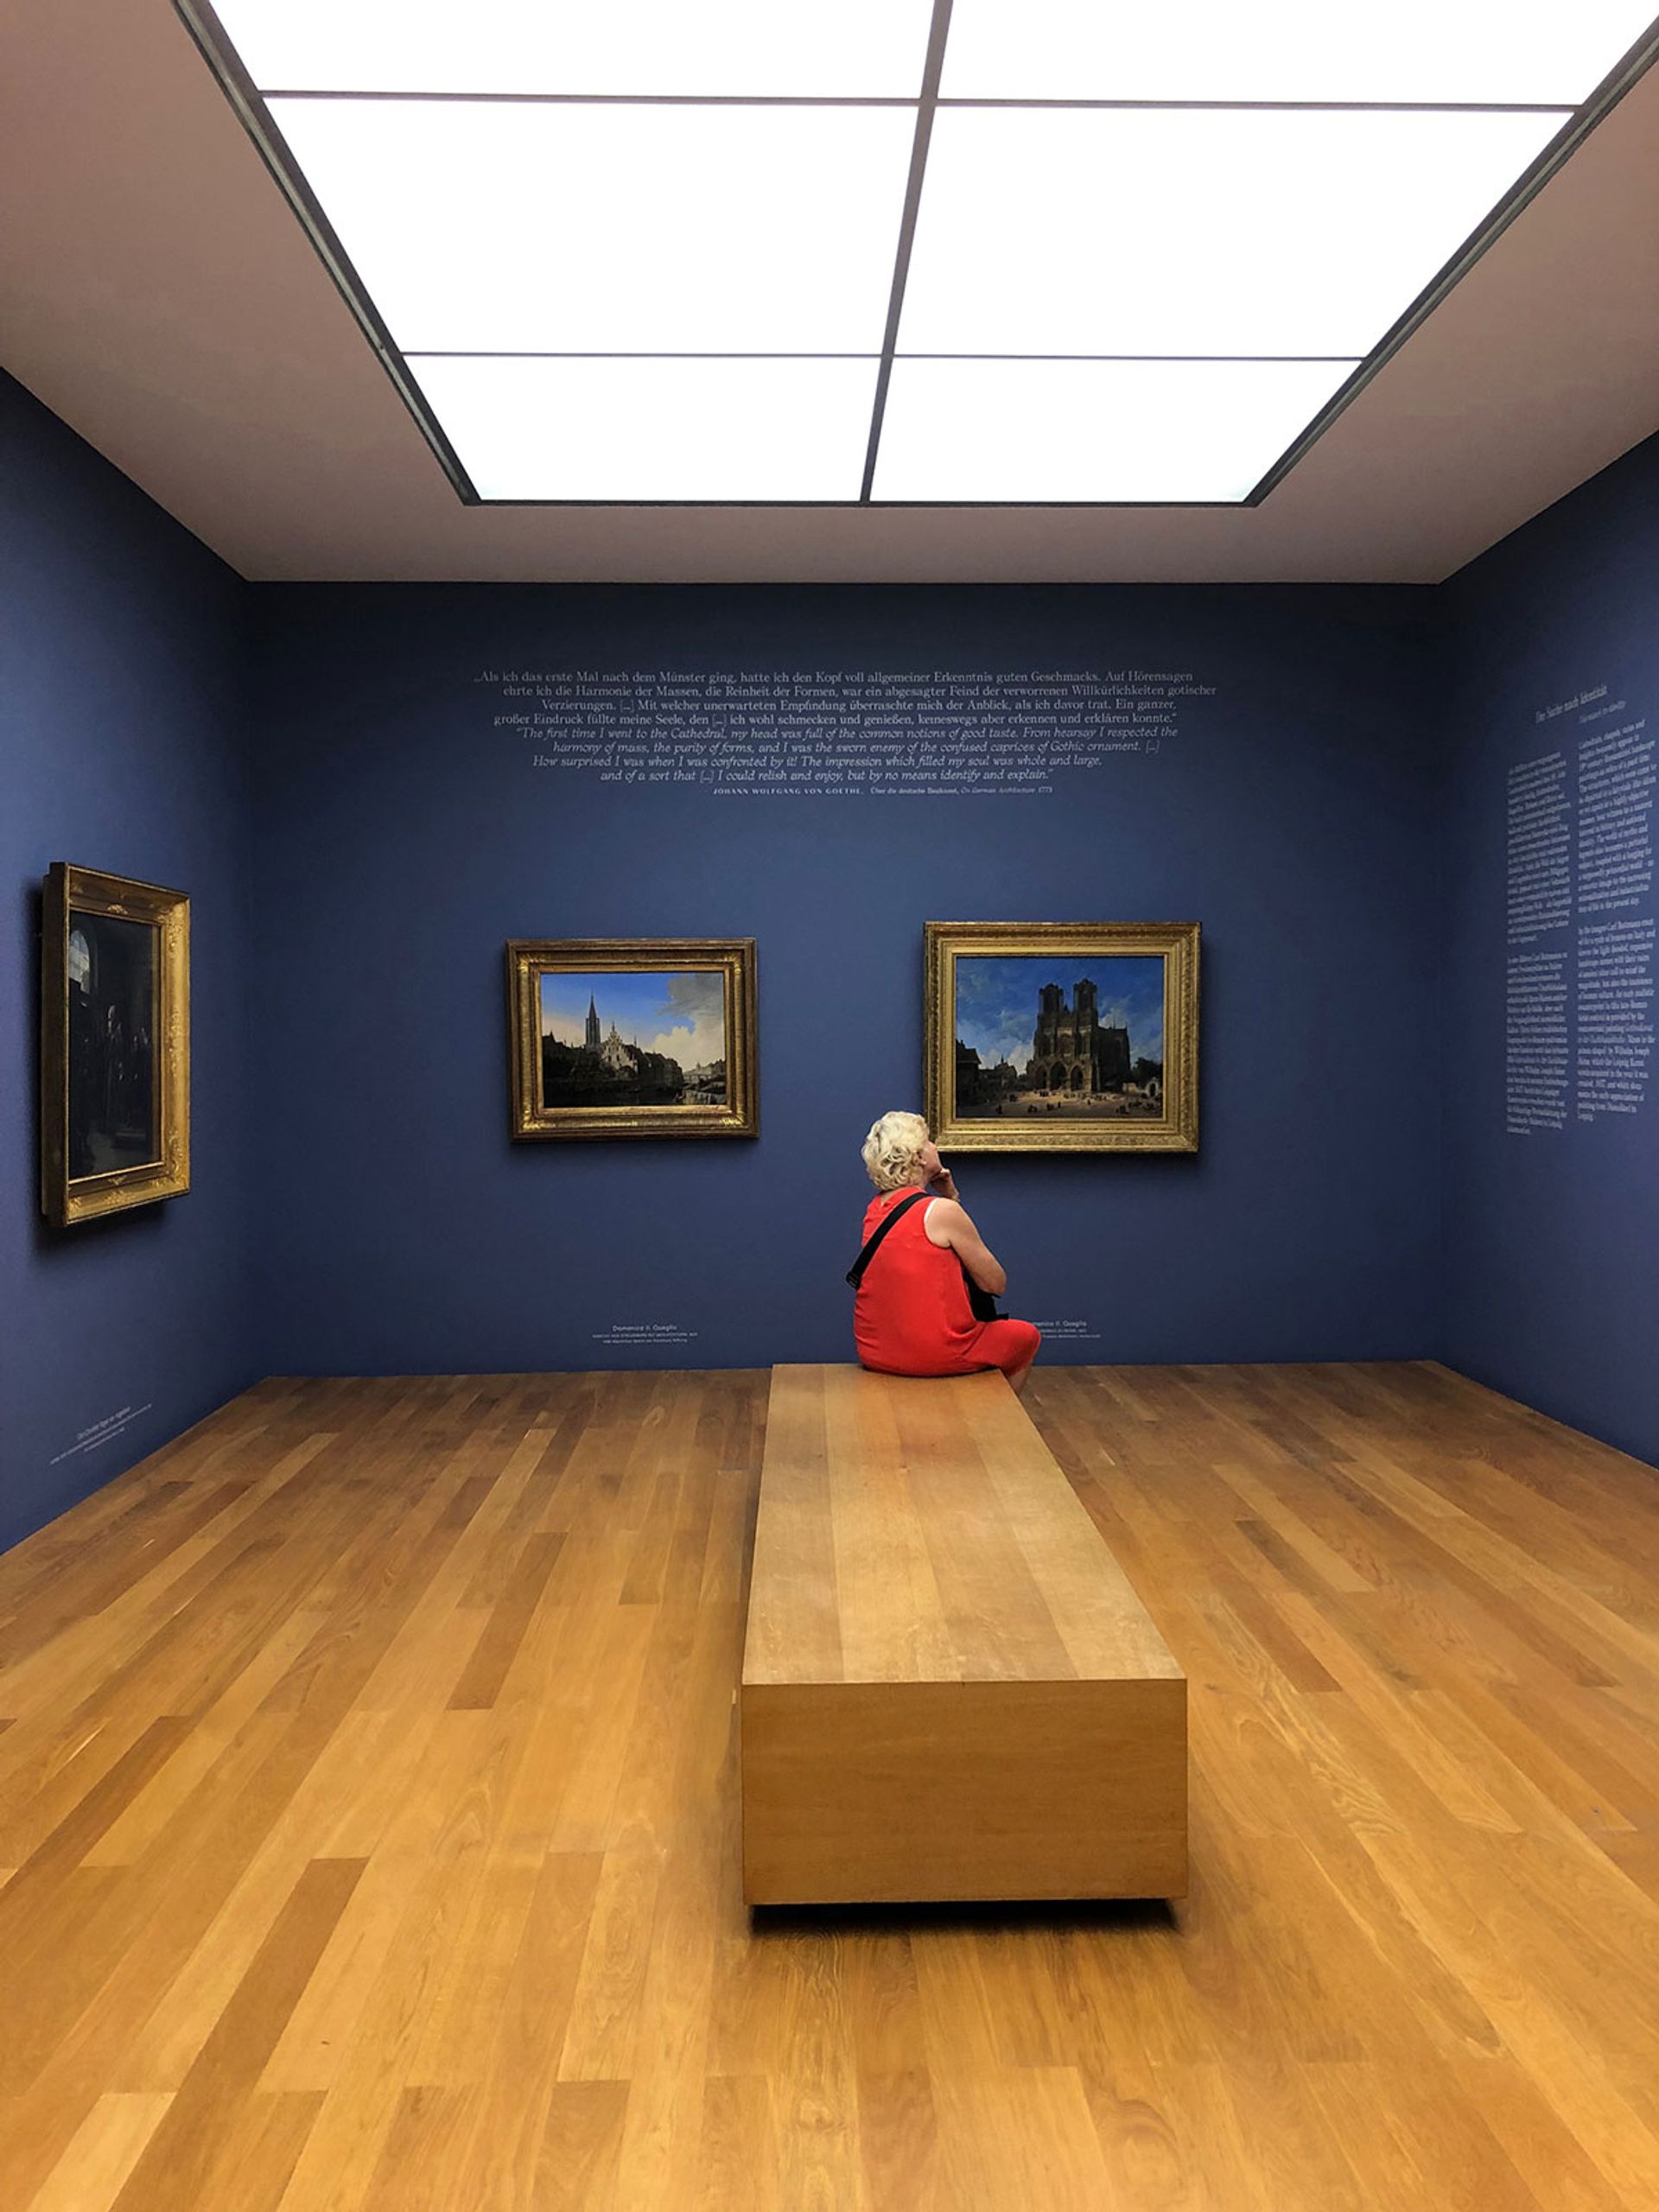 A visitor in Museum der bildenden Kunste, Leipzig, reading the extensive text on offer Photograph by Dinah Casson